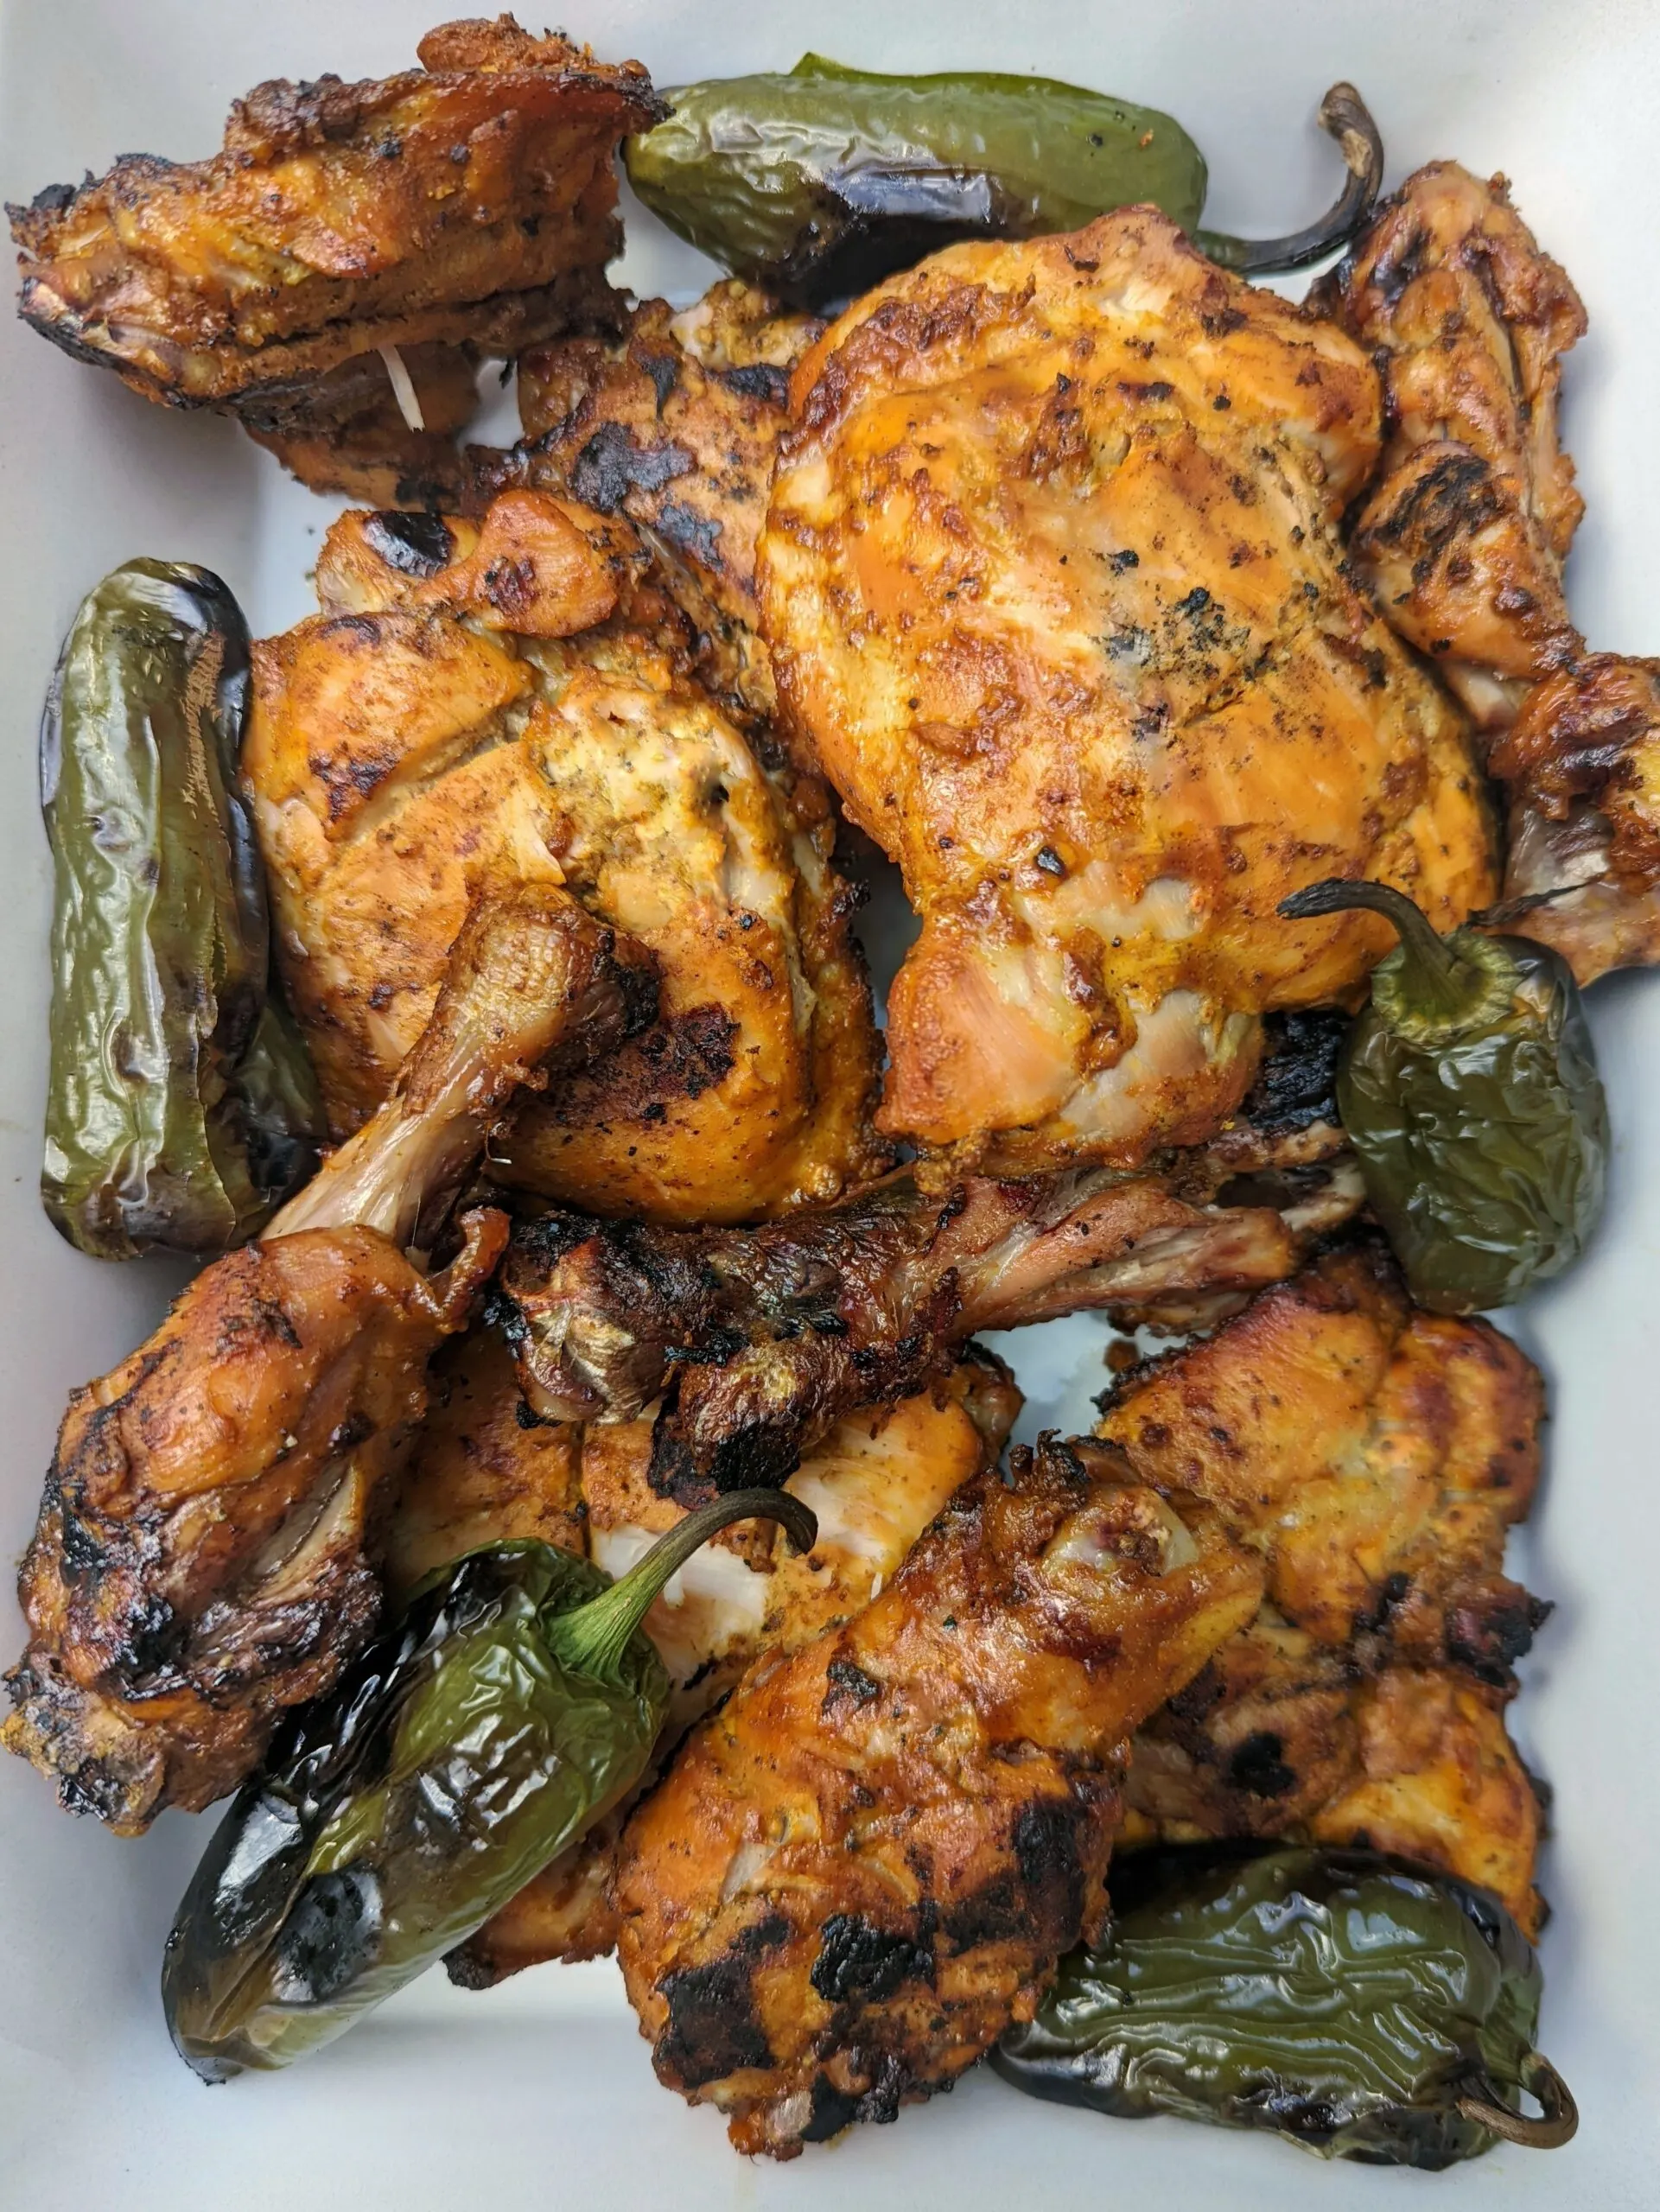 Grilled tandoori chicken with blistered chilies.